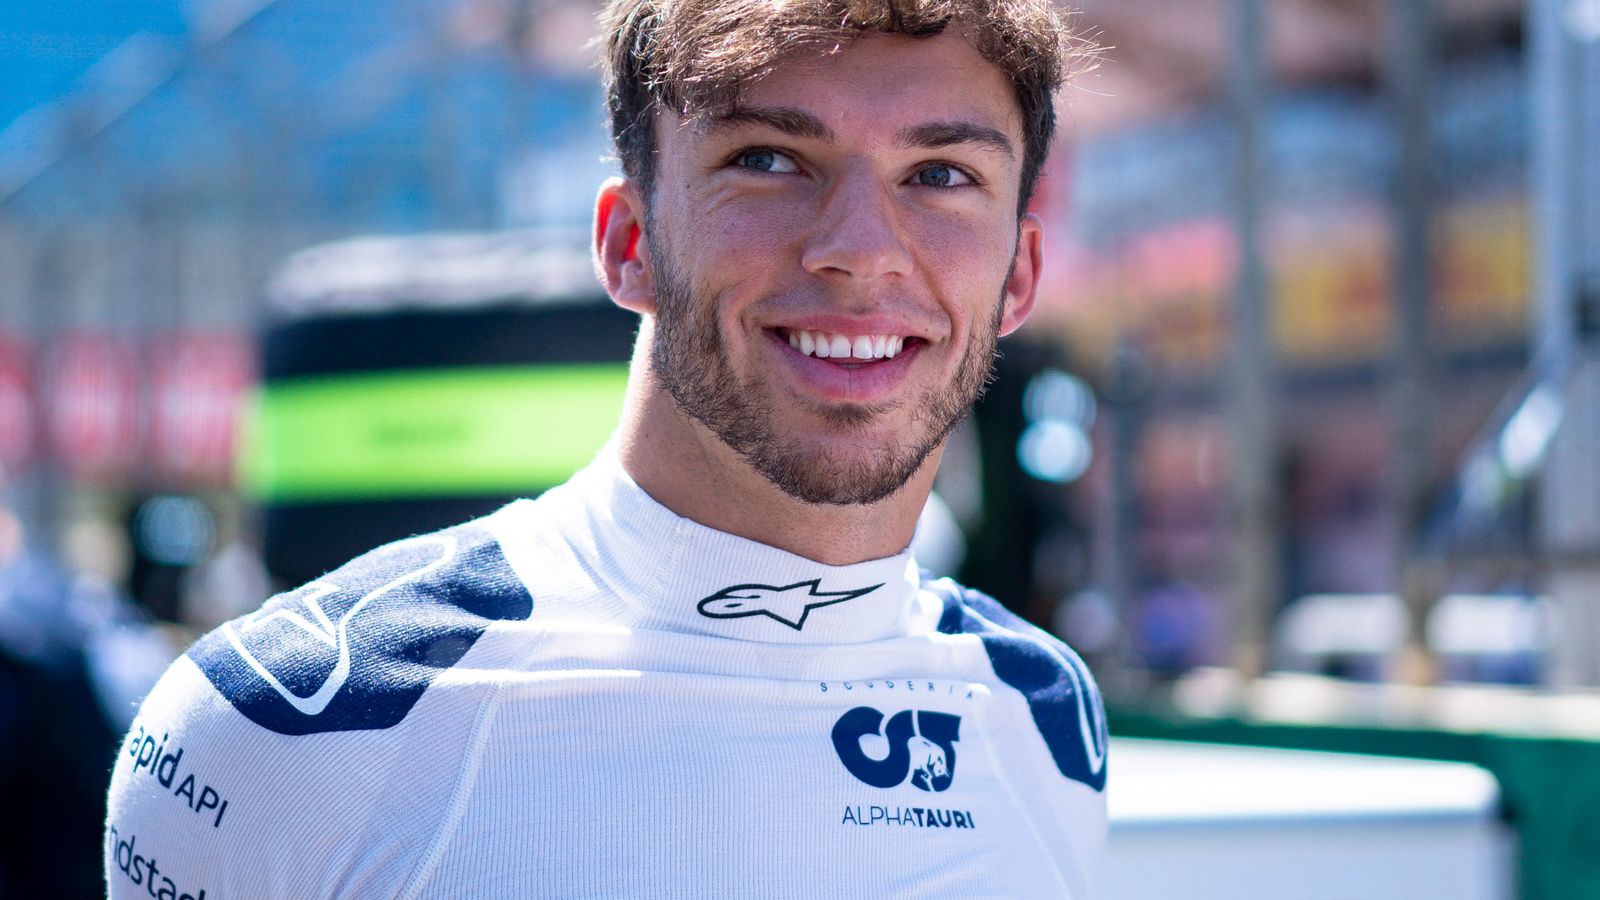 Pierre Gasly: French driver joining Alpine from AlphaTauri for Formula 1 2023 as transfer saga finally ends